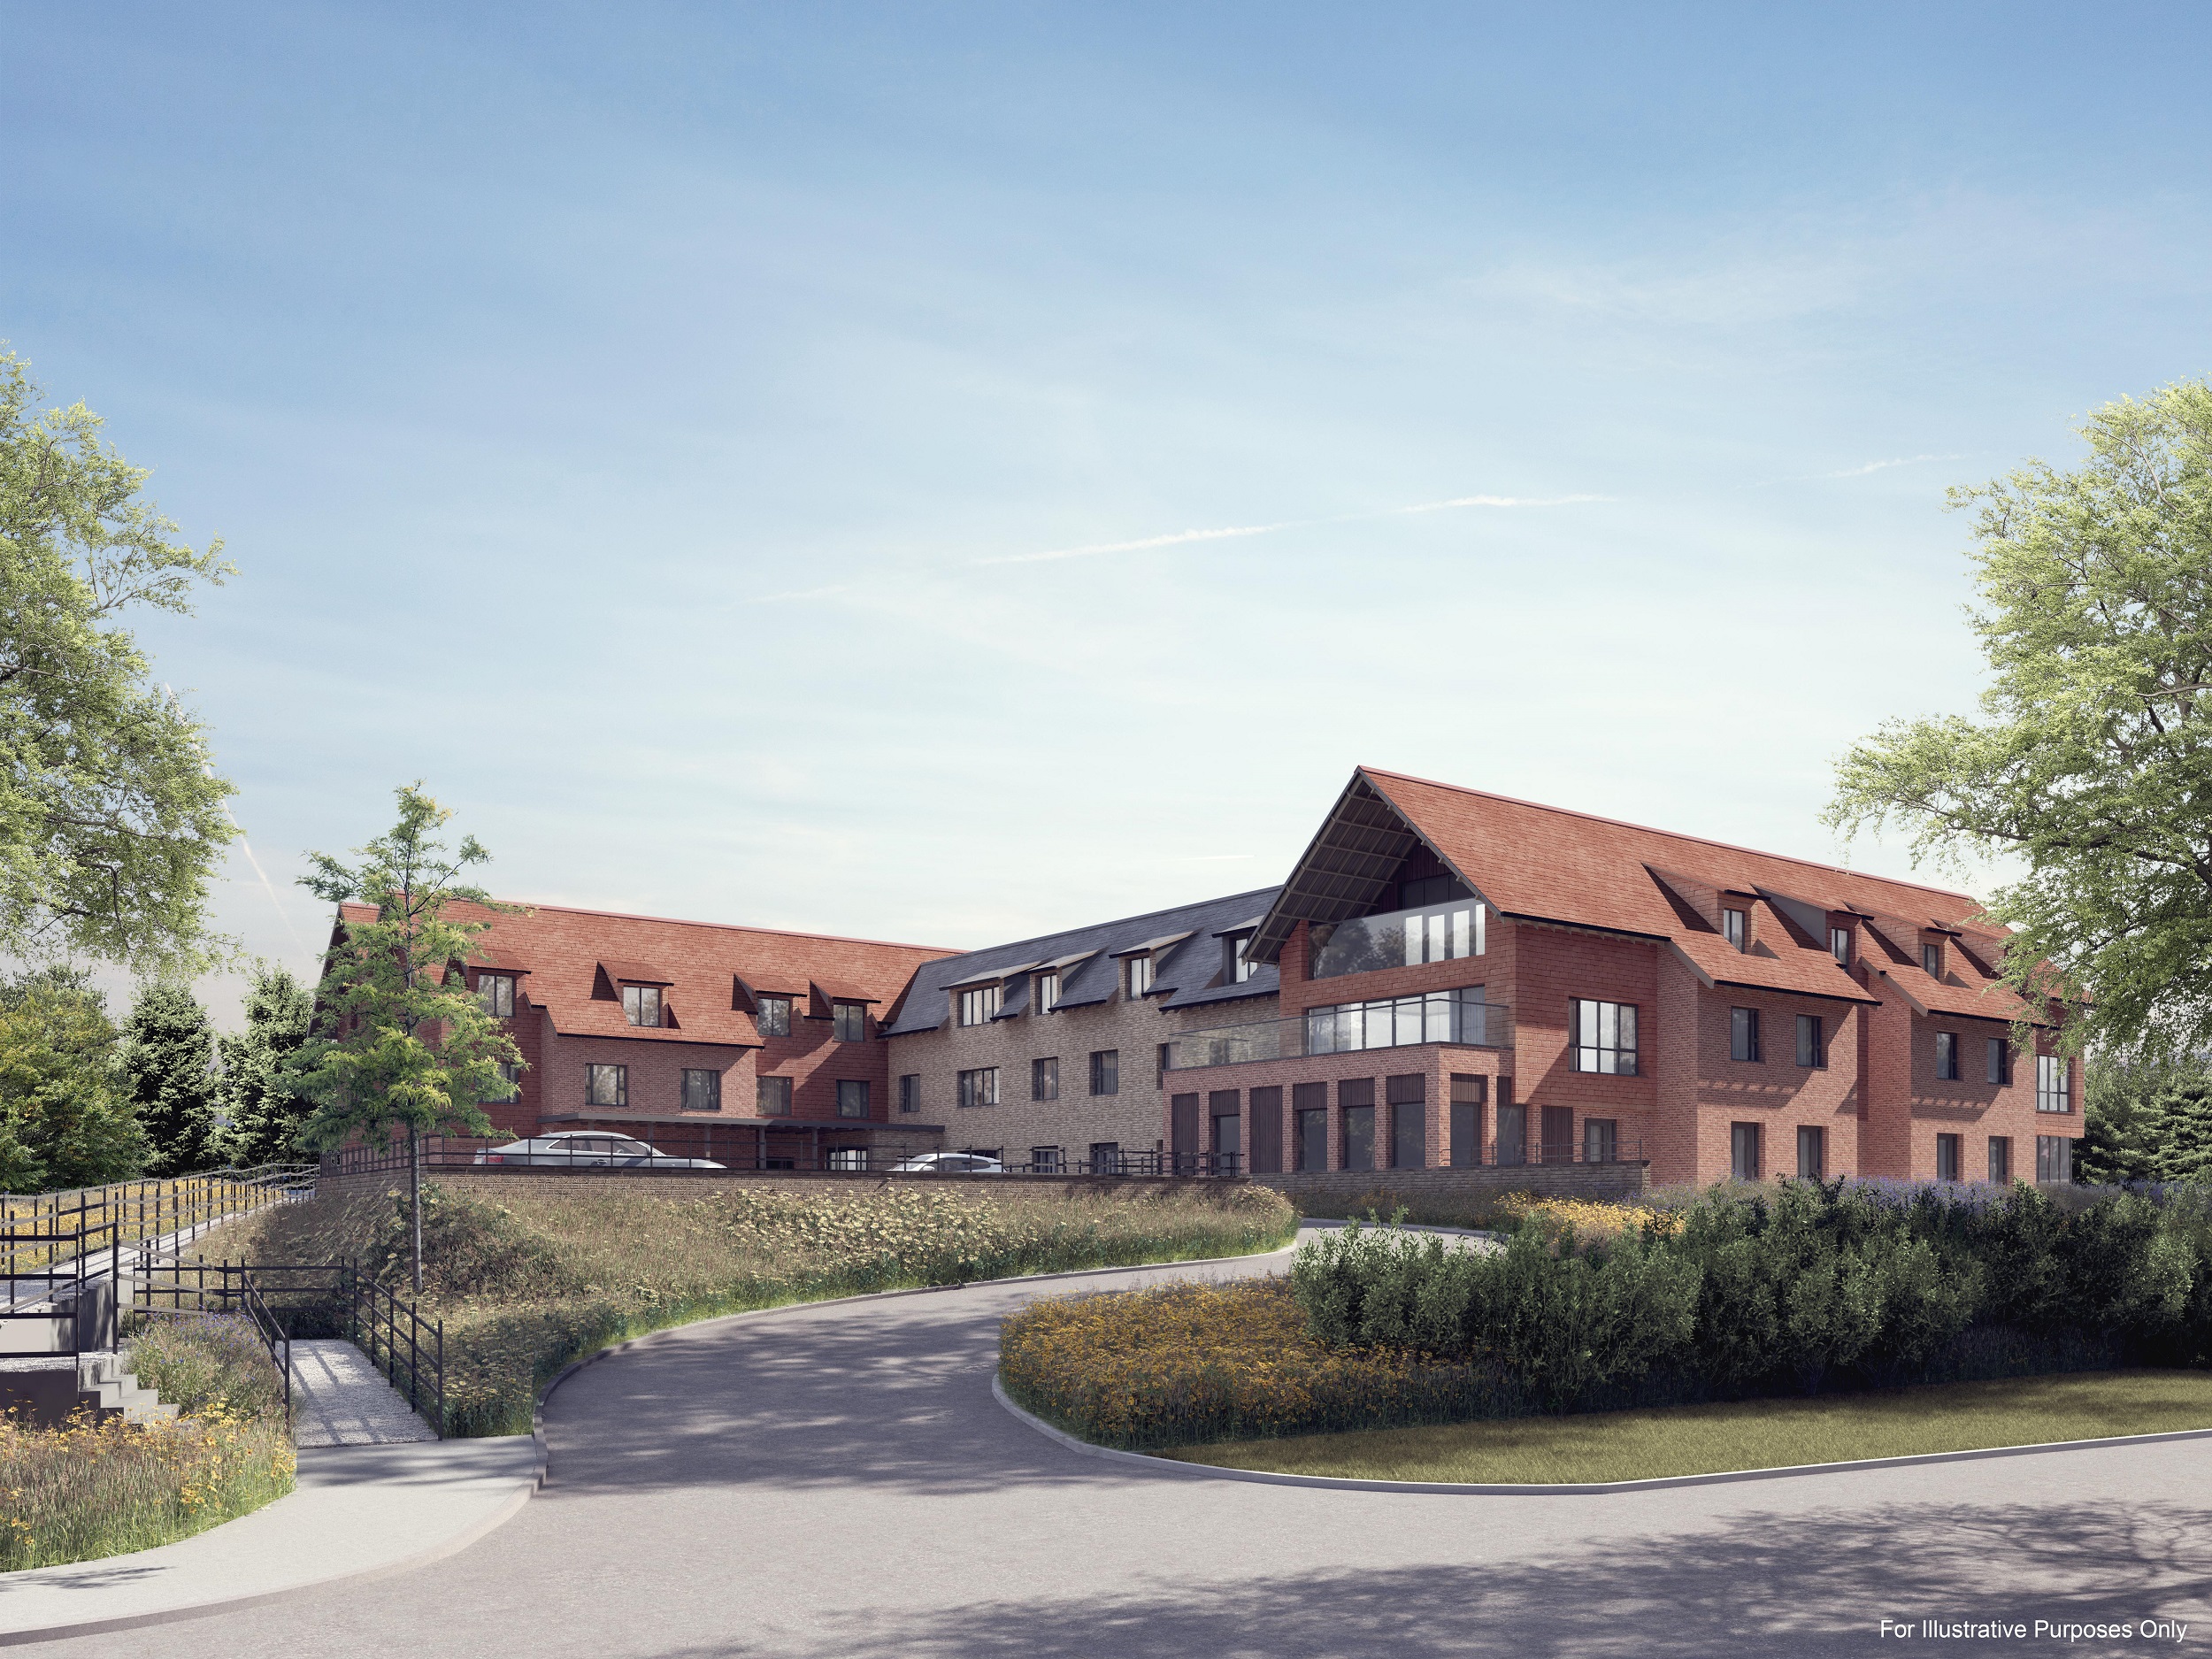 3D Modelling in Care Home Design - Harris Irwin Architects